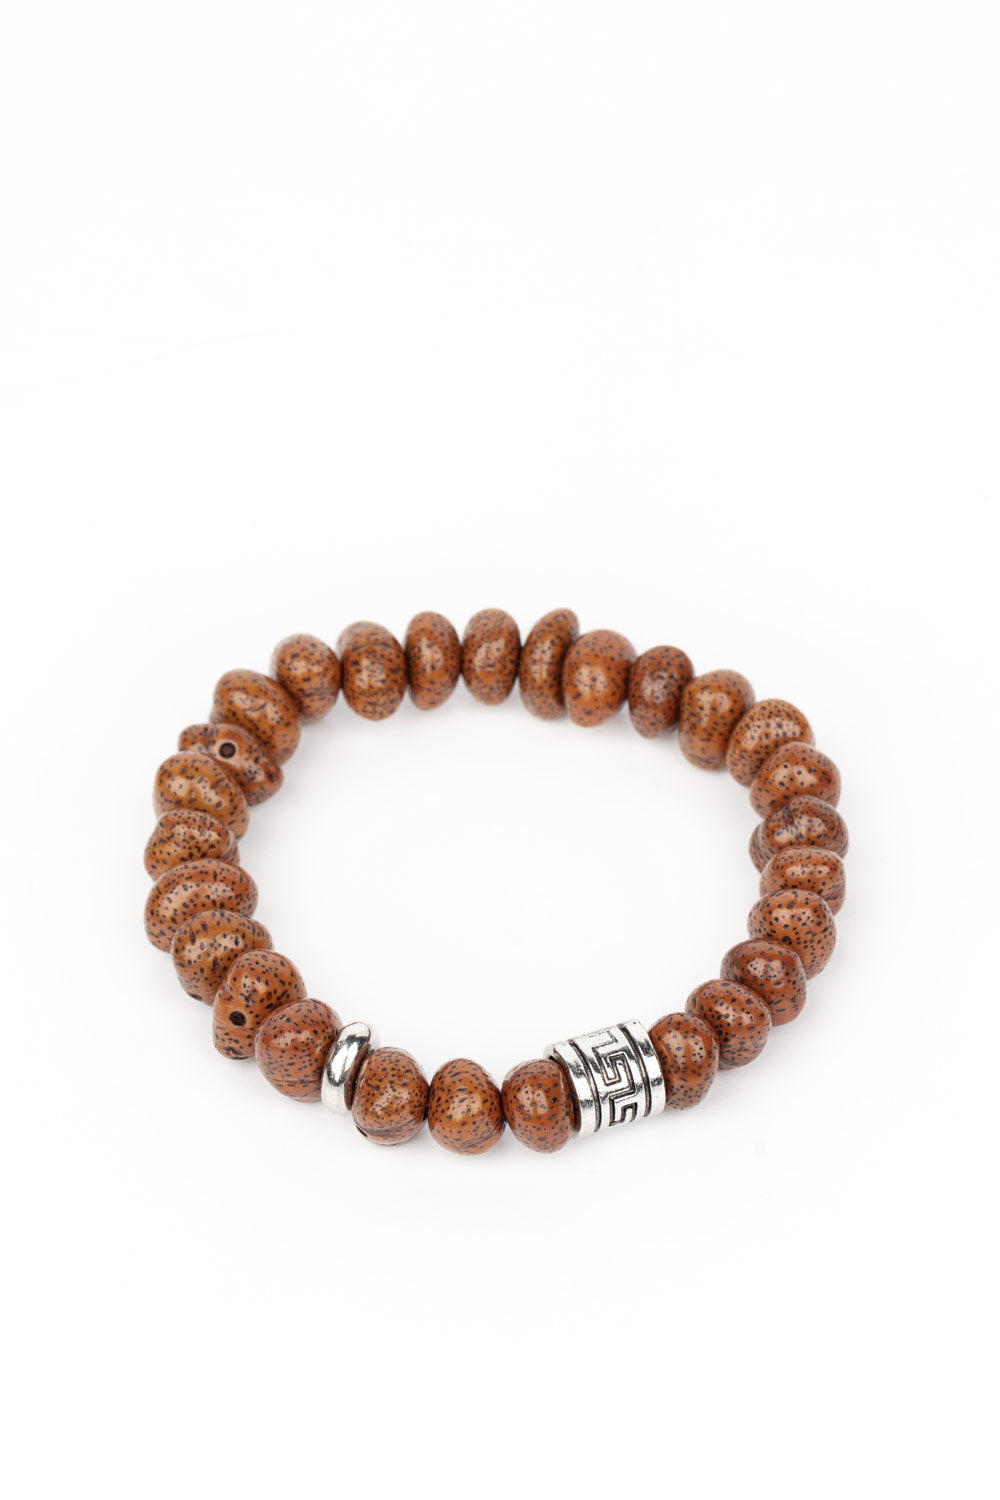 Natural State of Mind - Brown Stretchy Urban Bracelet - Paparazzi Accessories - 
Featuring a natural finish, a collection of faux brown stones are threaded along a stretchy band around the wrist. Shimmery silver accents are added to the earthy compilation for an artisan inspired finish. Sold as one individual bracelet.
